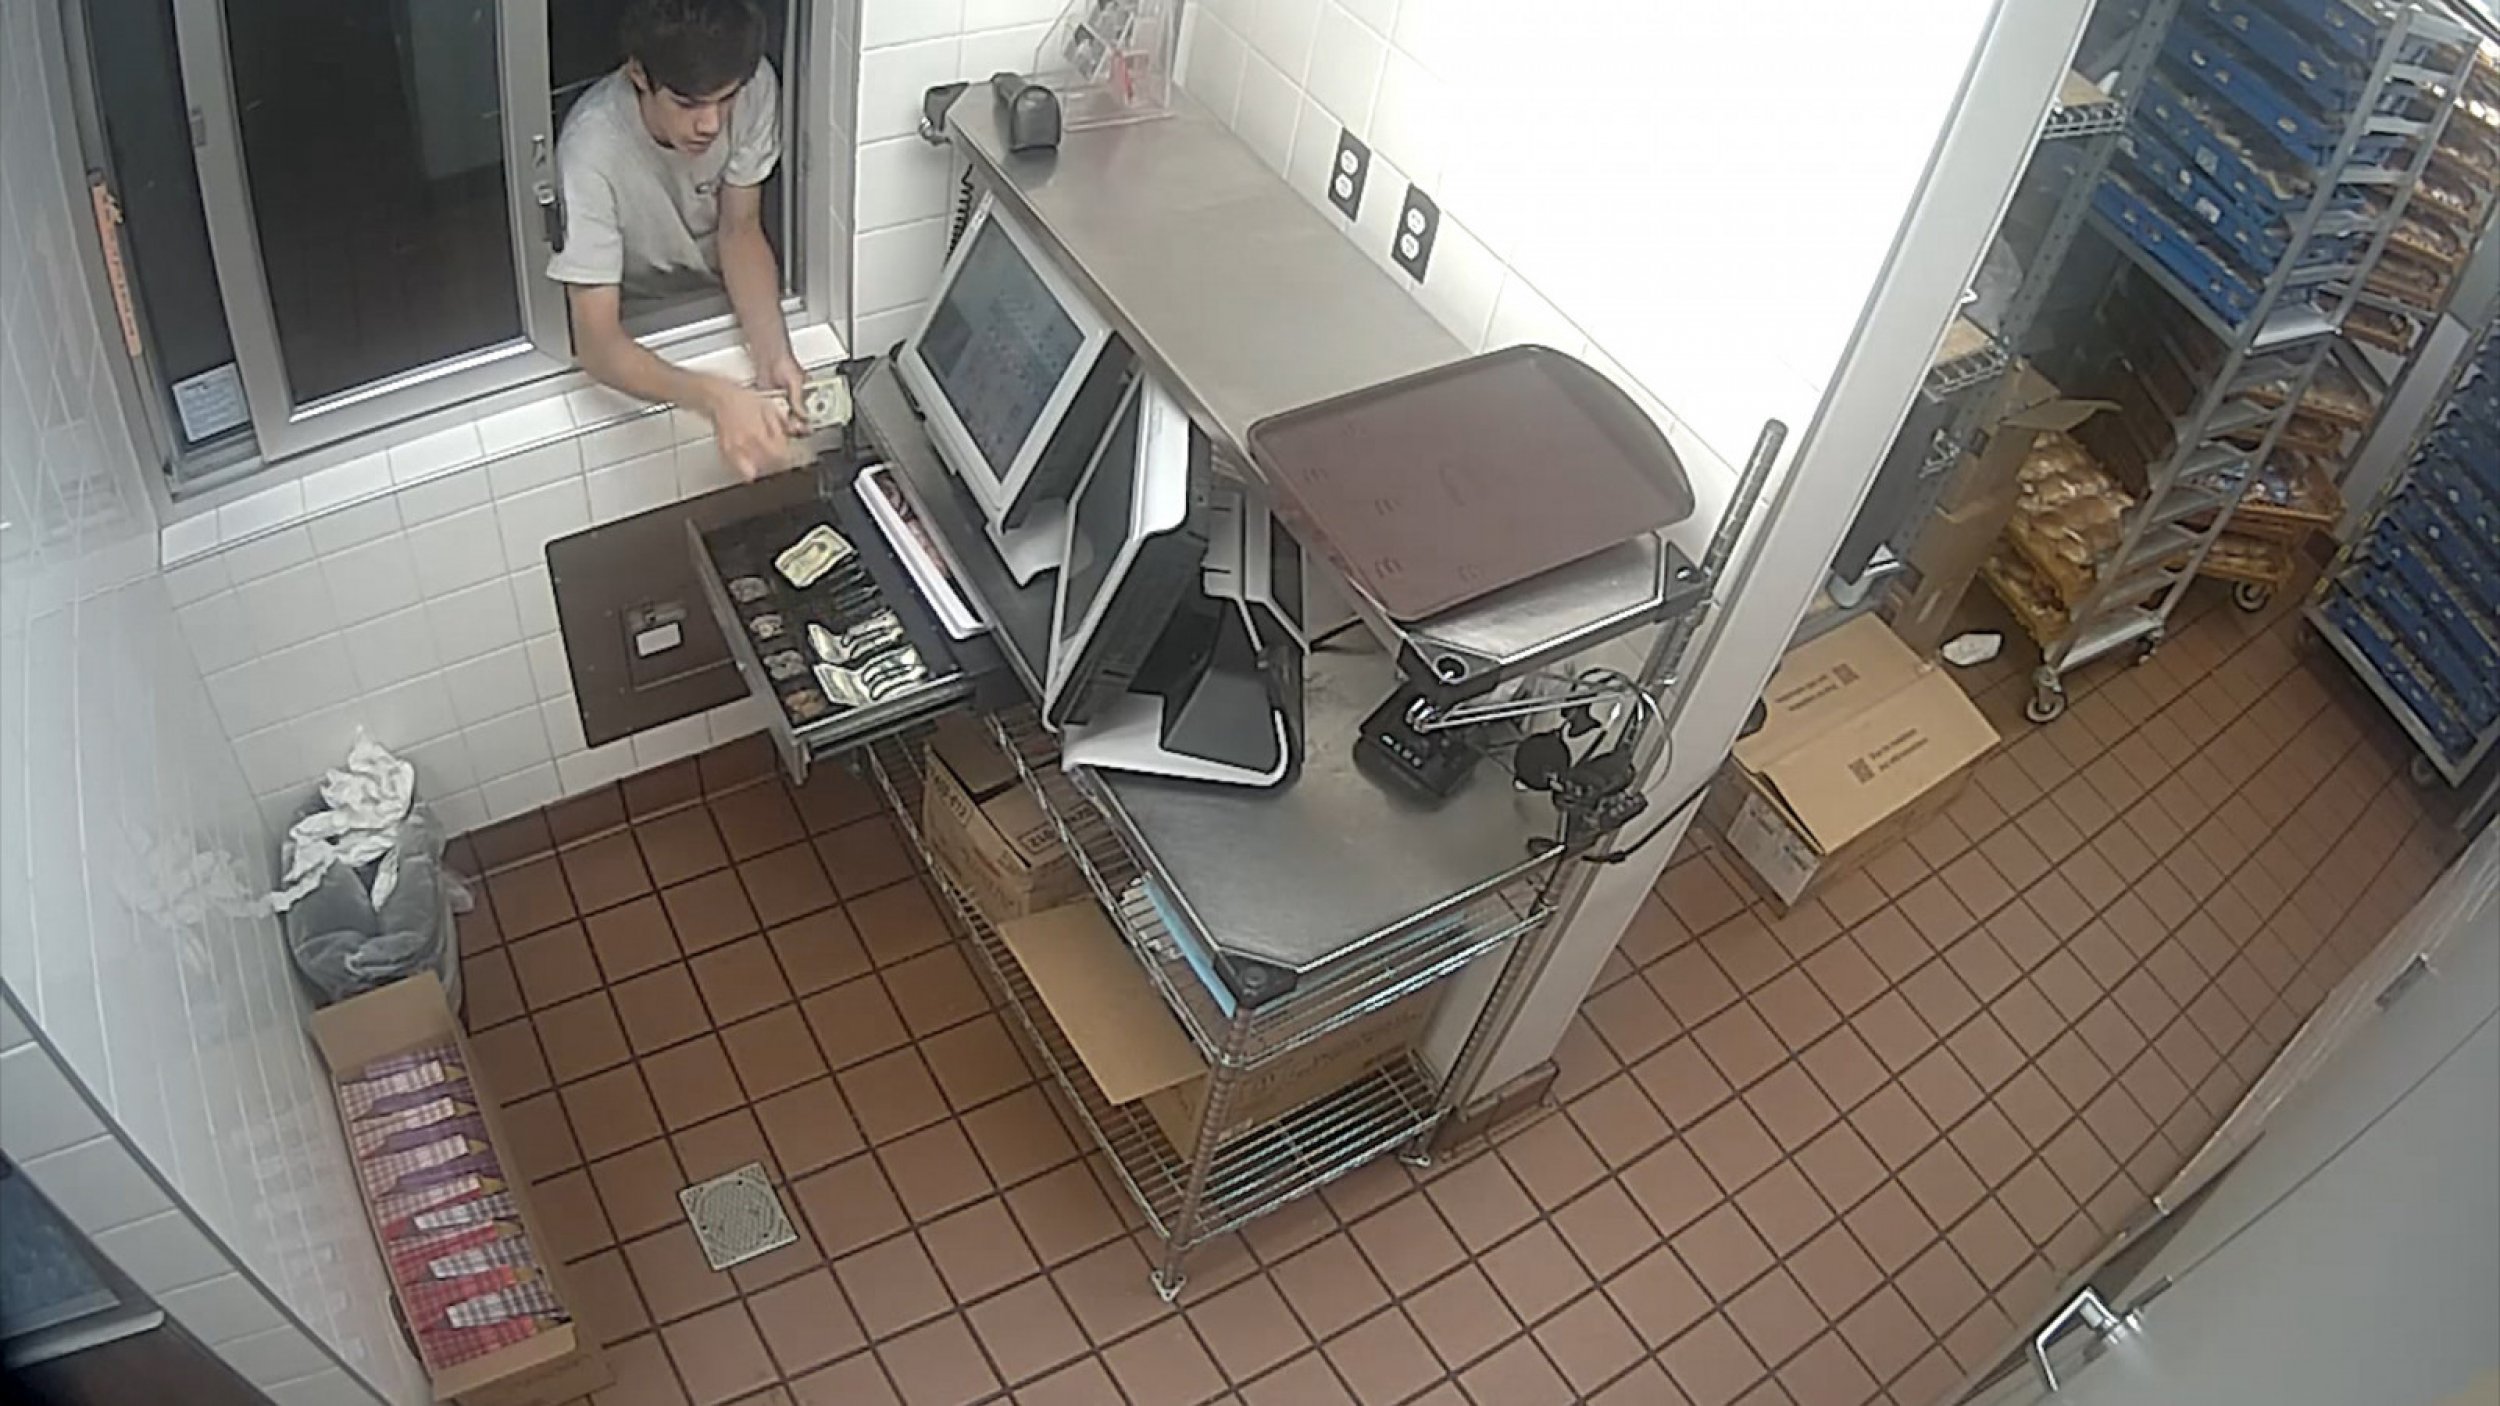 Man Caught On CCTV Cleaning Out Register At McDonalds Drive-Thru In Arizona